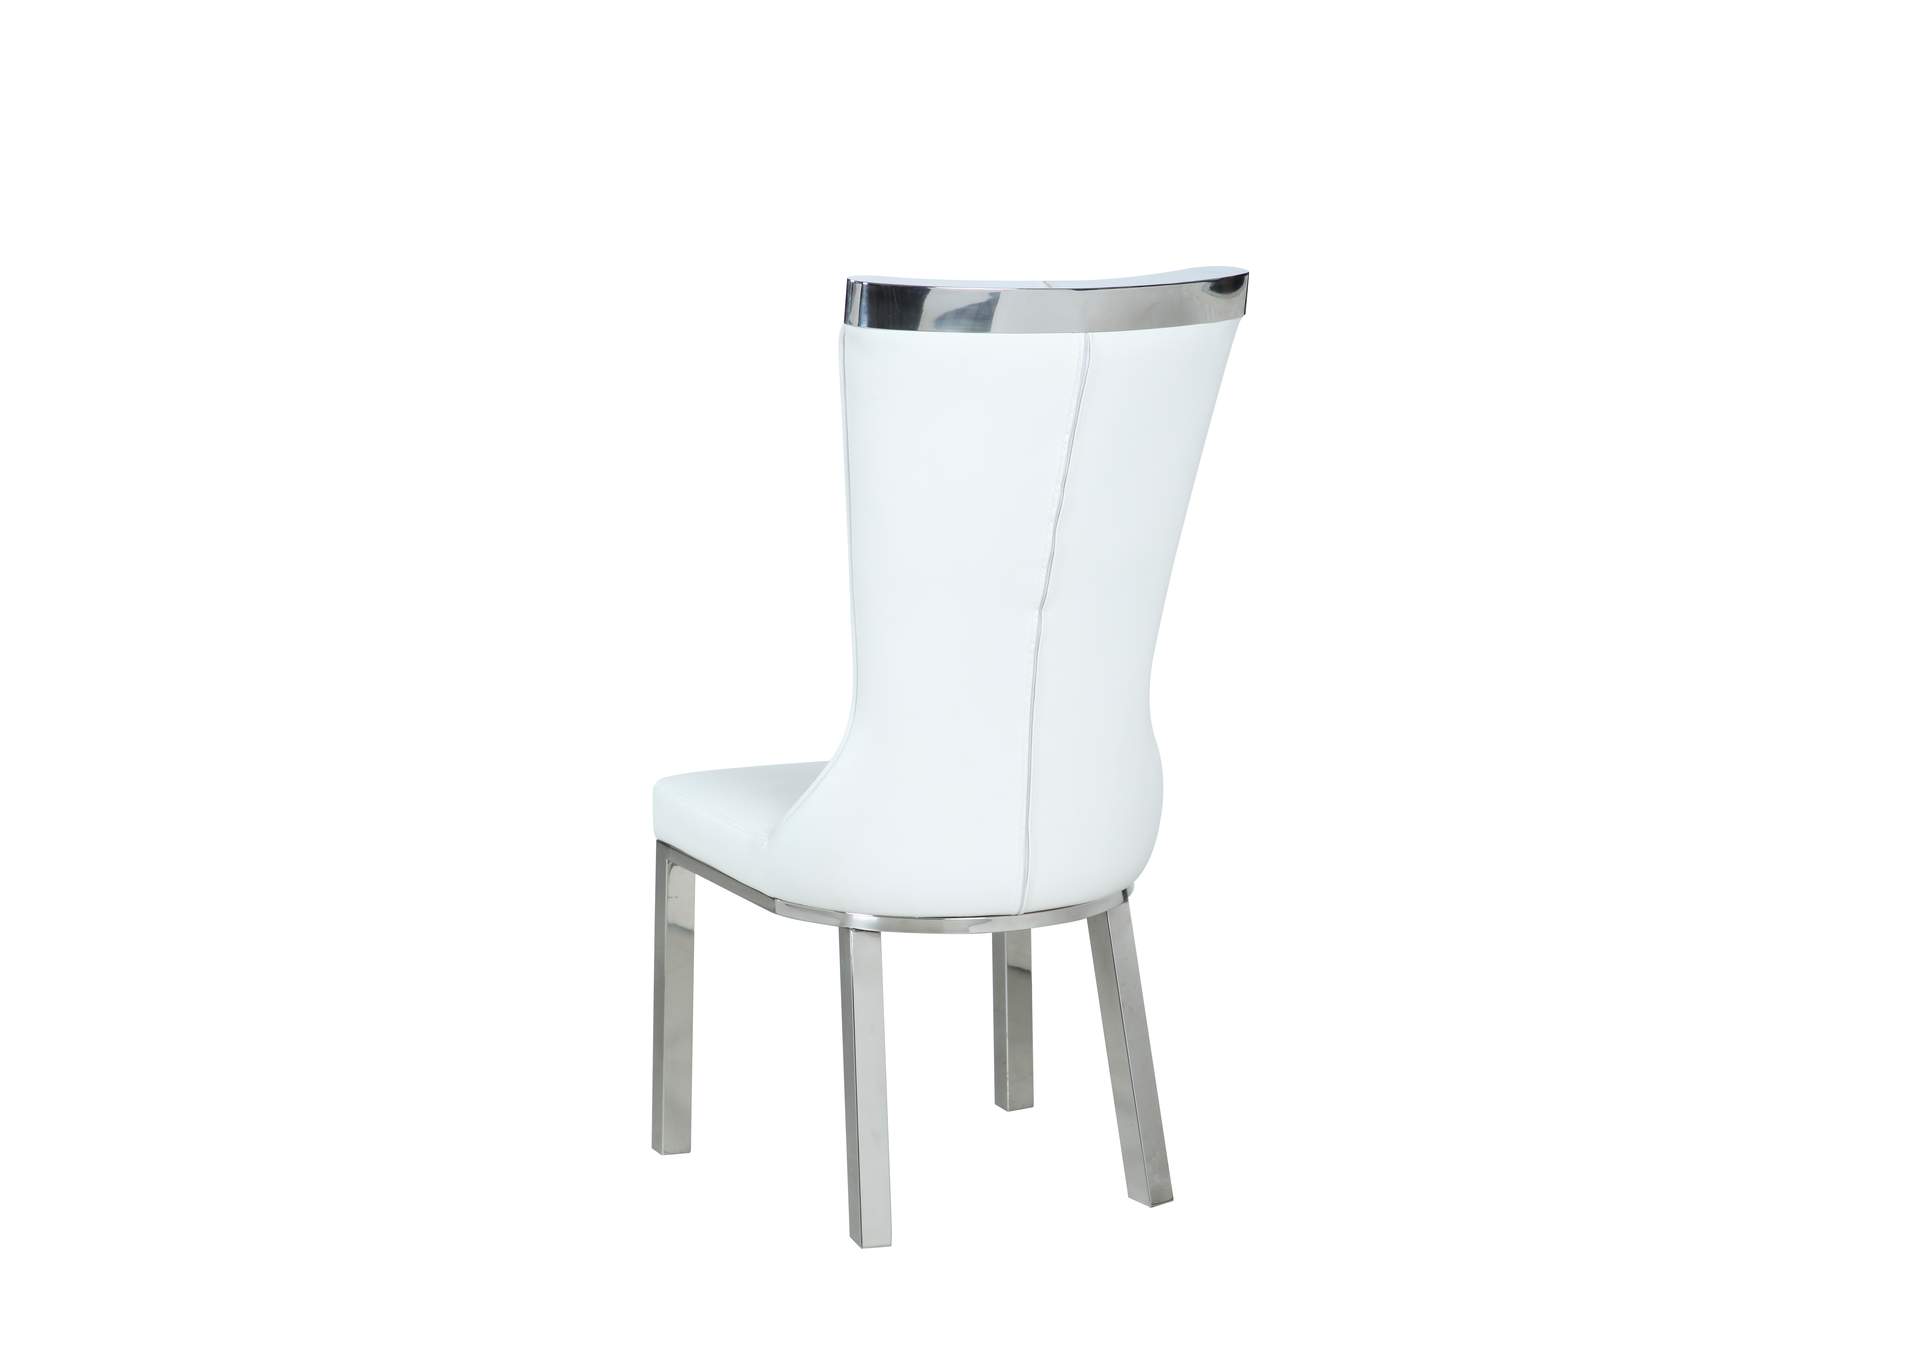 Contemporary Dining Set With Rectangular Glass Table & 4 White Chairs,Chintaly Imports